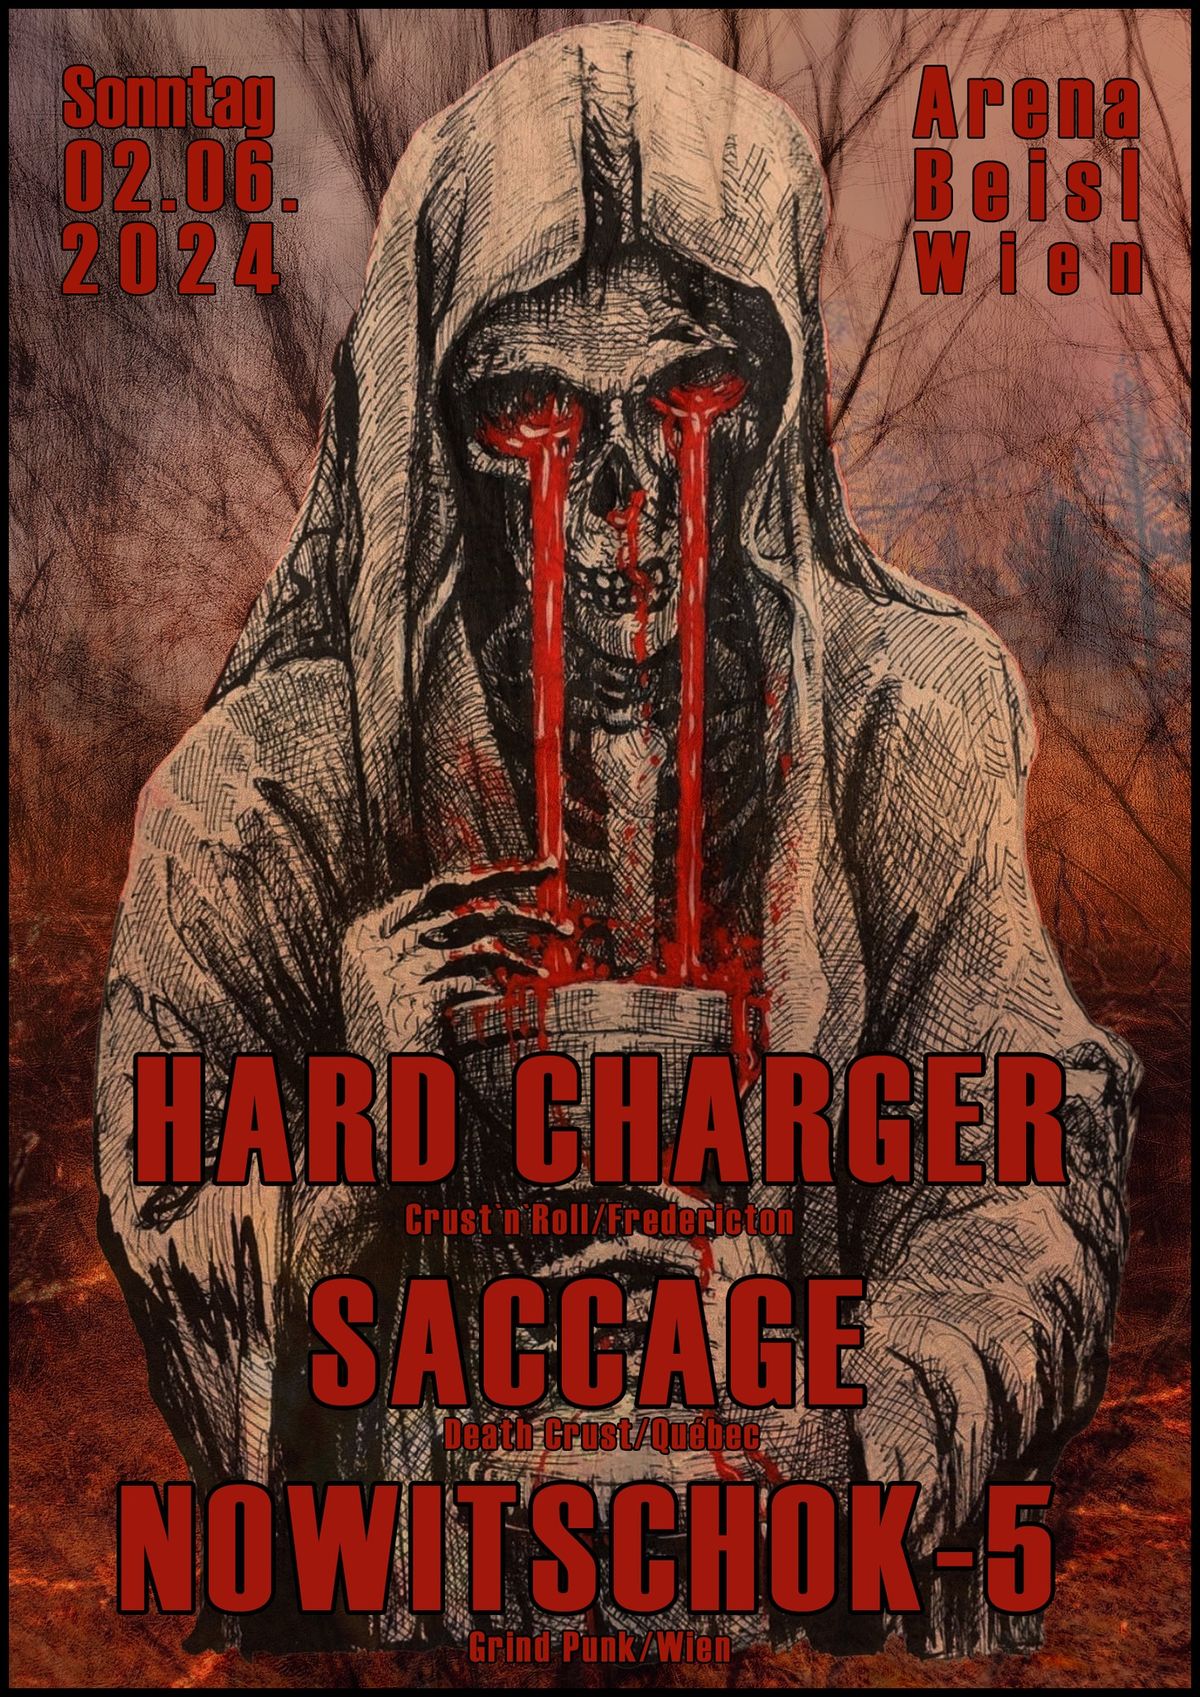 HARD CHARGER (can) | SACCAGE (can) | NOWITSCHOK-5